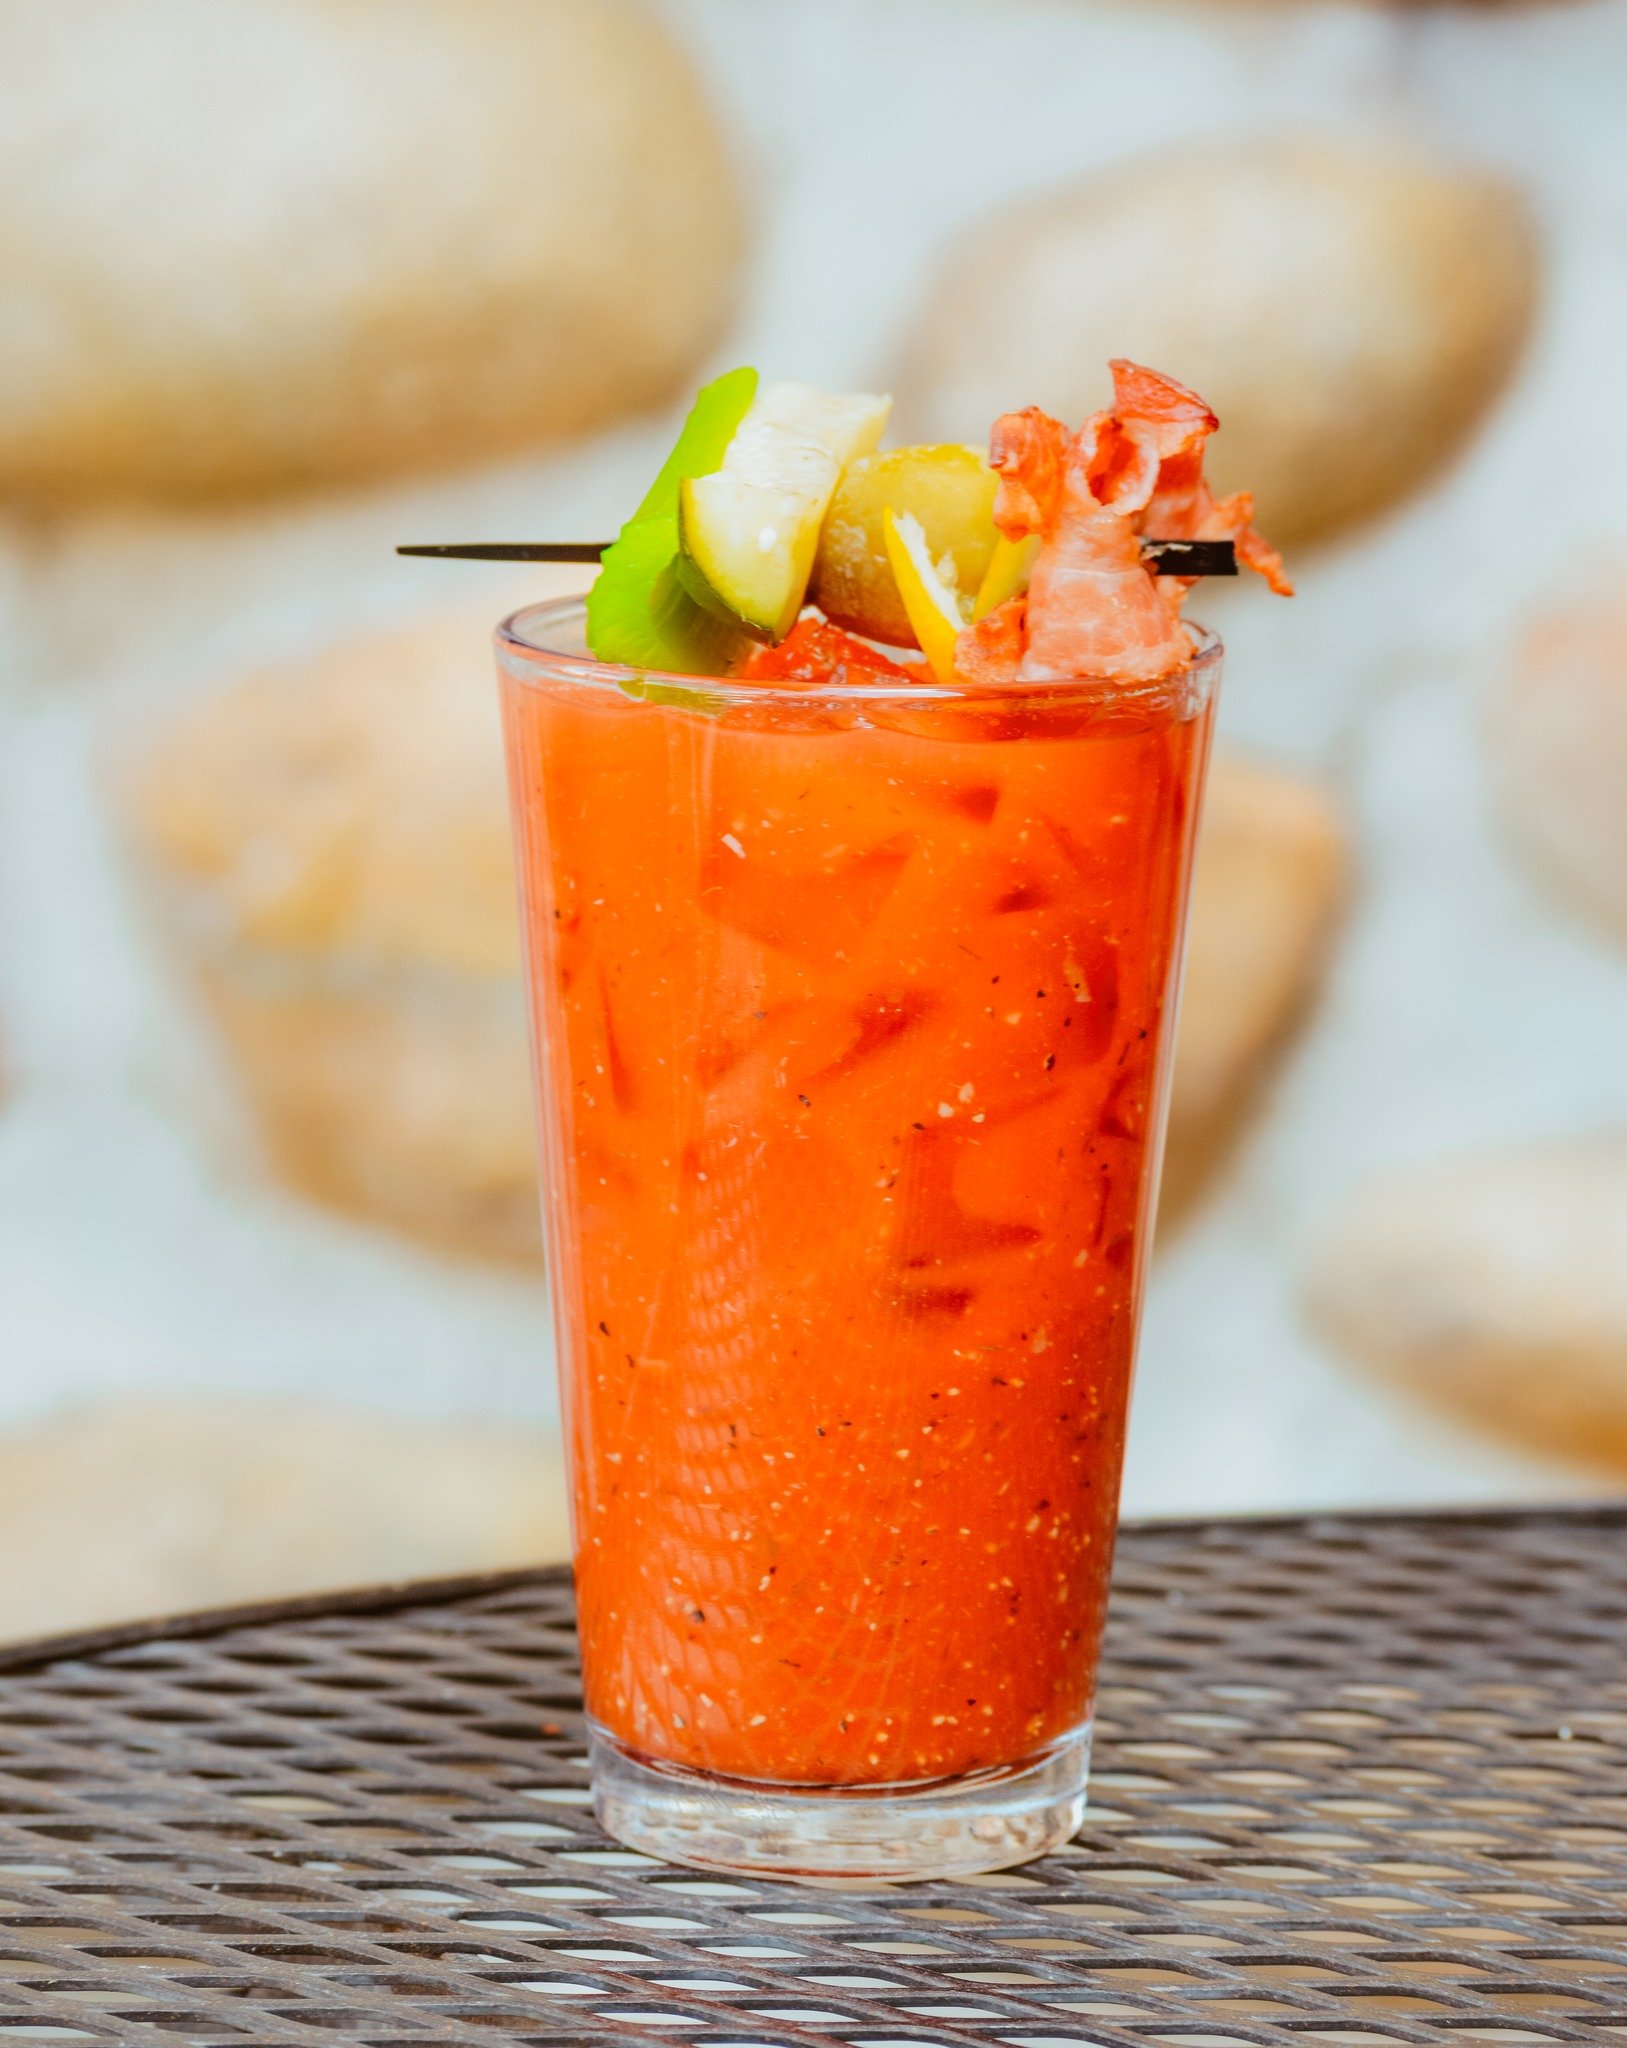 Brunch essential: Sipping on a spicy Bloody Mary, garnished with all of the fixings. Who else loves a little kick in their cocktail? We know it's gloomy today, but brunch on the patio is so close we can taste it! 

#ColoradoWeather #FalseSpring #Bloo